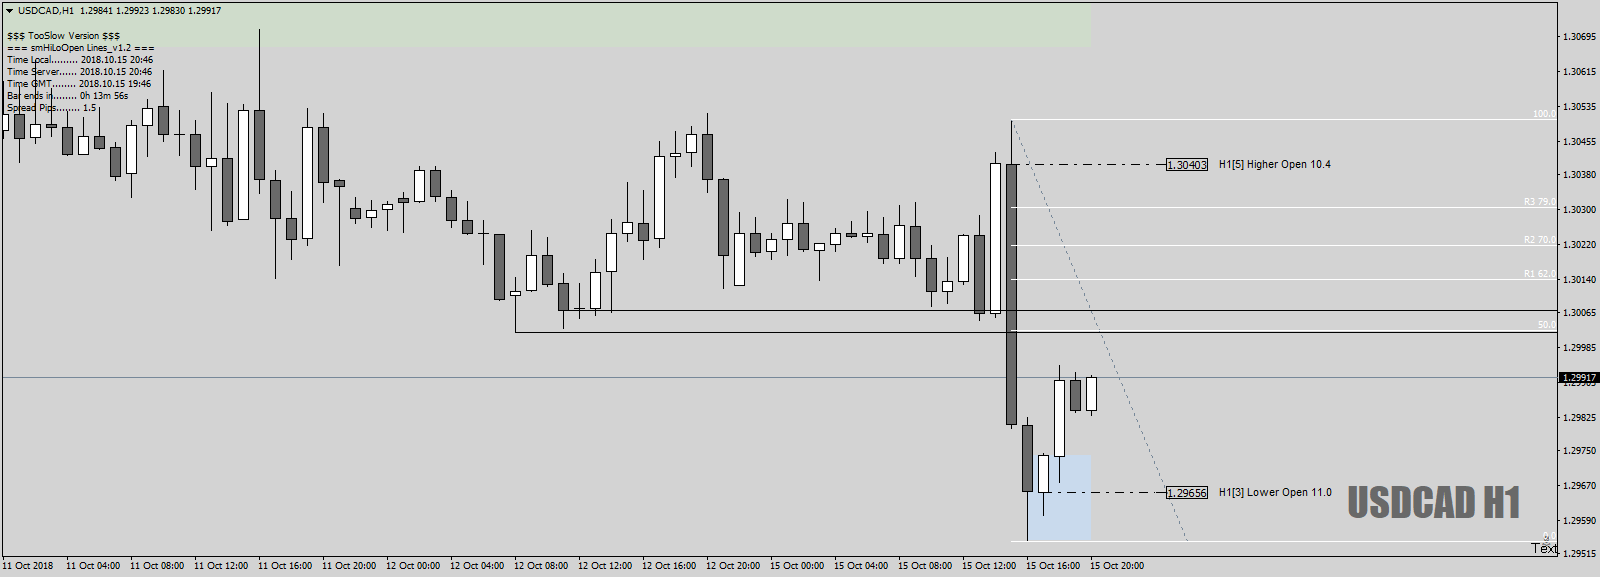 USDCADH1asZ-LineByTwo+FibOct15th18.png